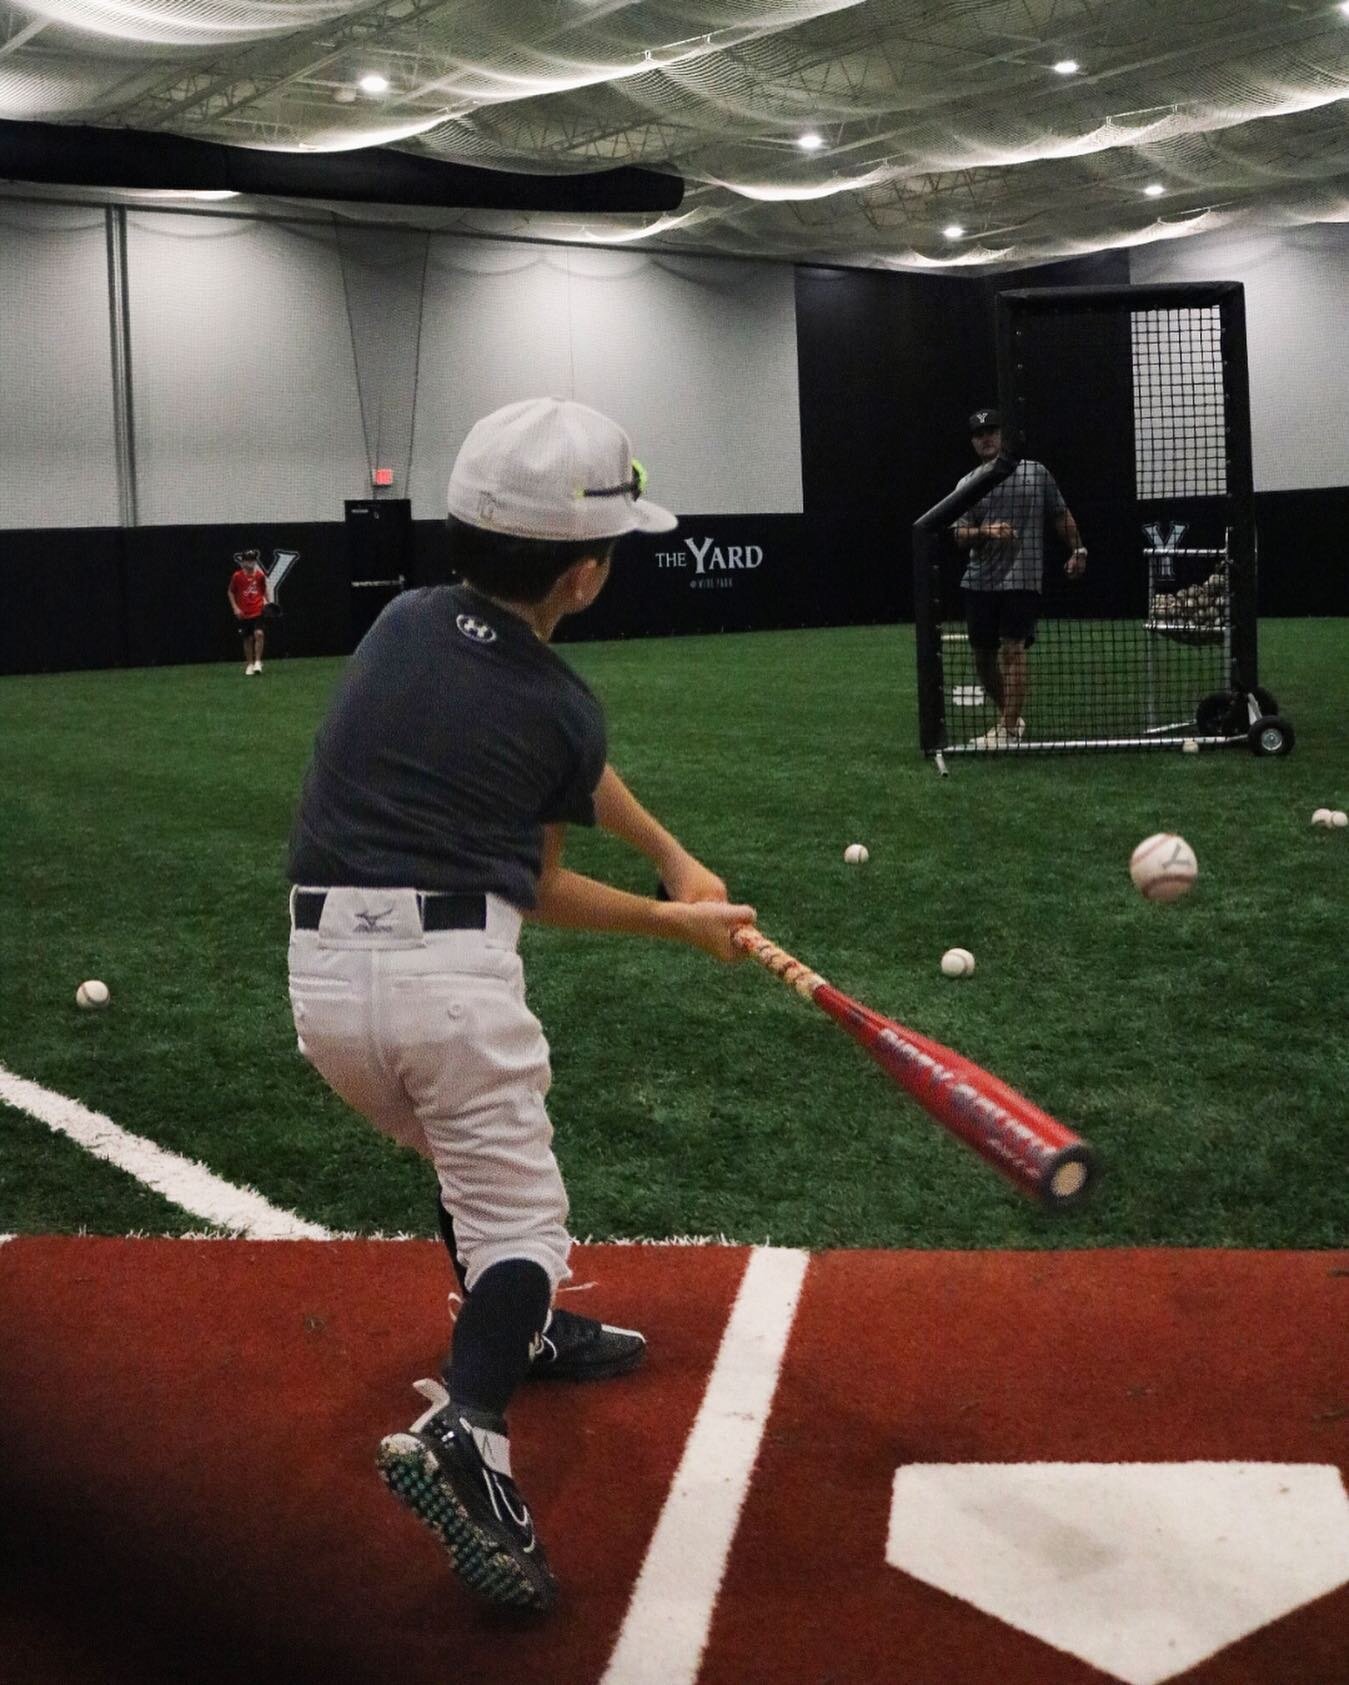 Gear up for action-packed Saturdays at The Yard baseball clinics! Get ready to level up your fielding and hitting skills. Sign up today in The Yard @ Wire Park app to save your spot! ⚾🌟

#UnleashThePower #makeithappen #baseball #softball #athens #at